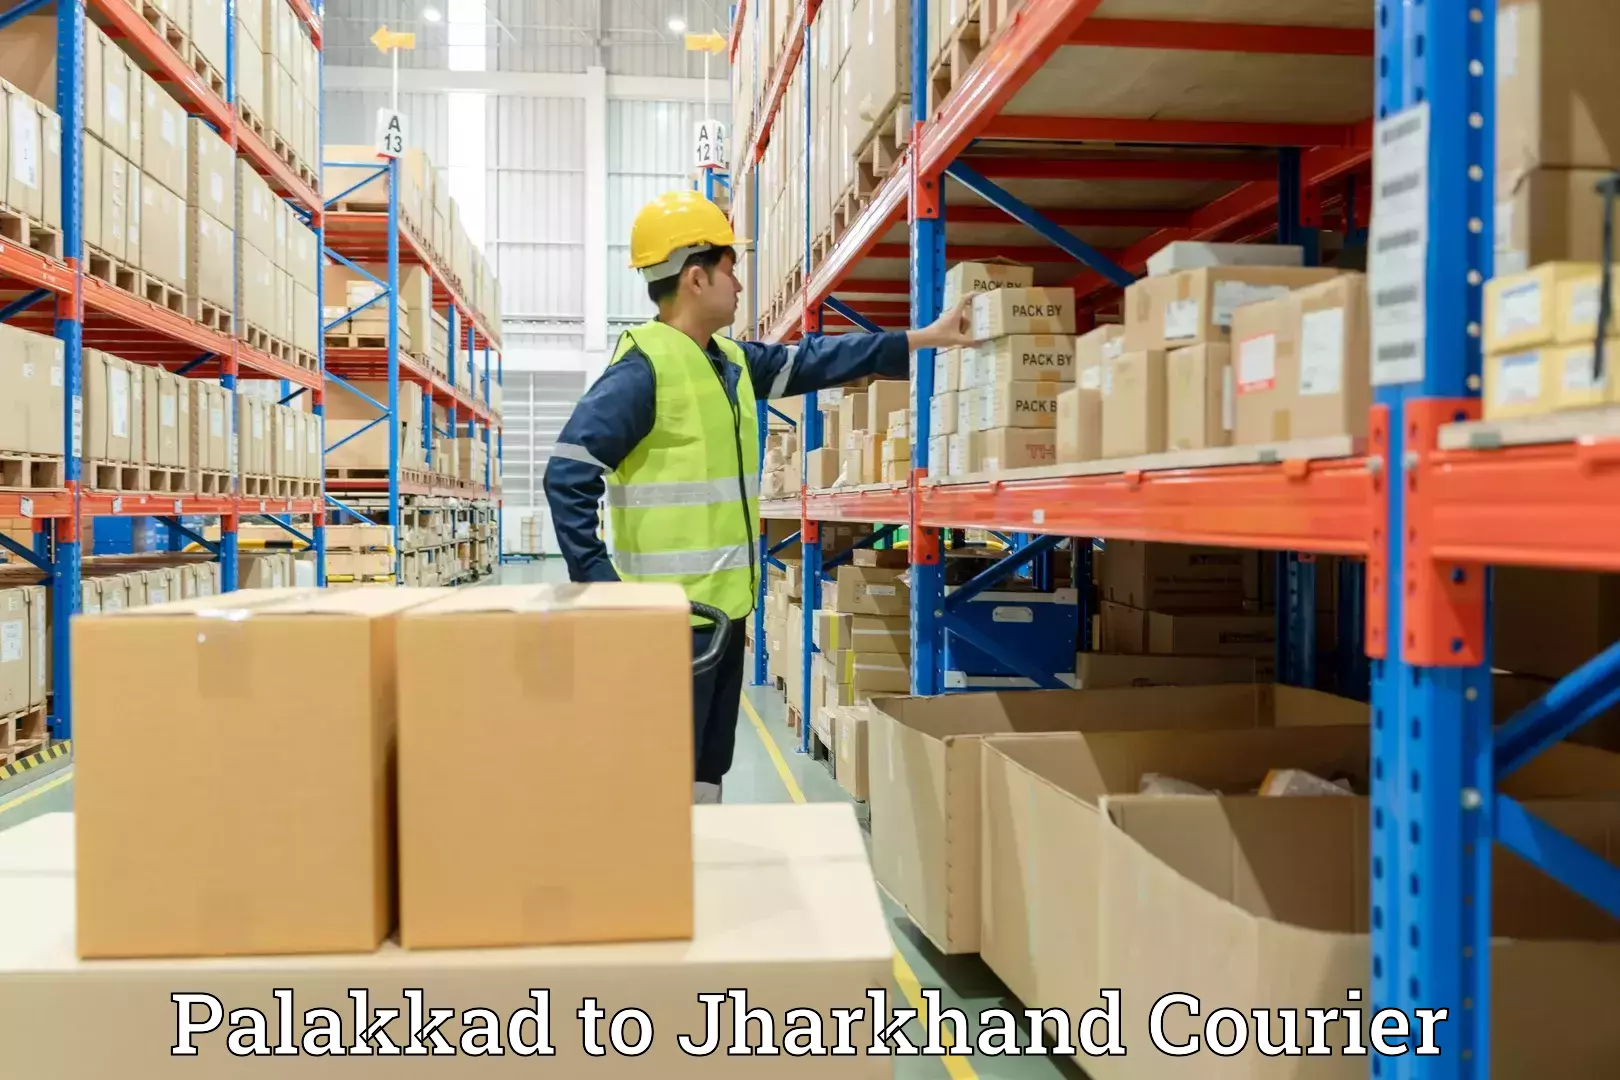 Furniture relocation experts Palakkad to Jharkhand